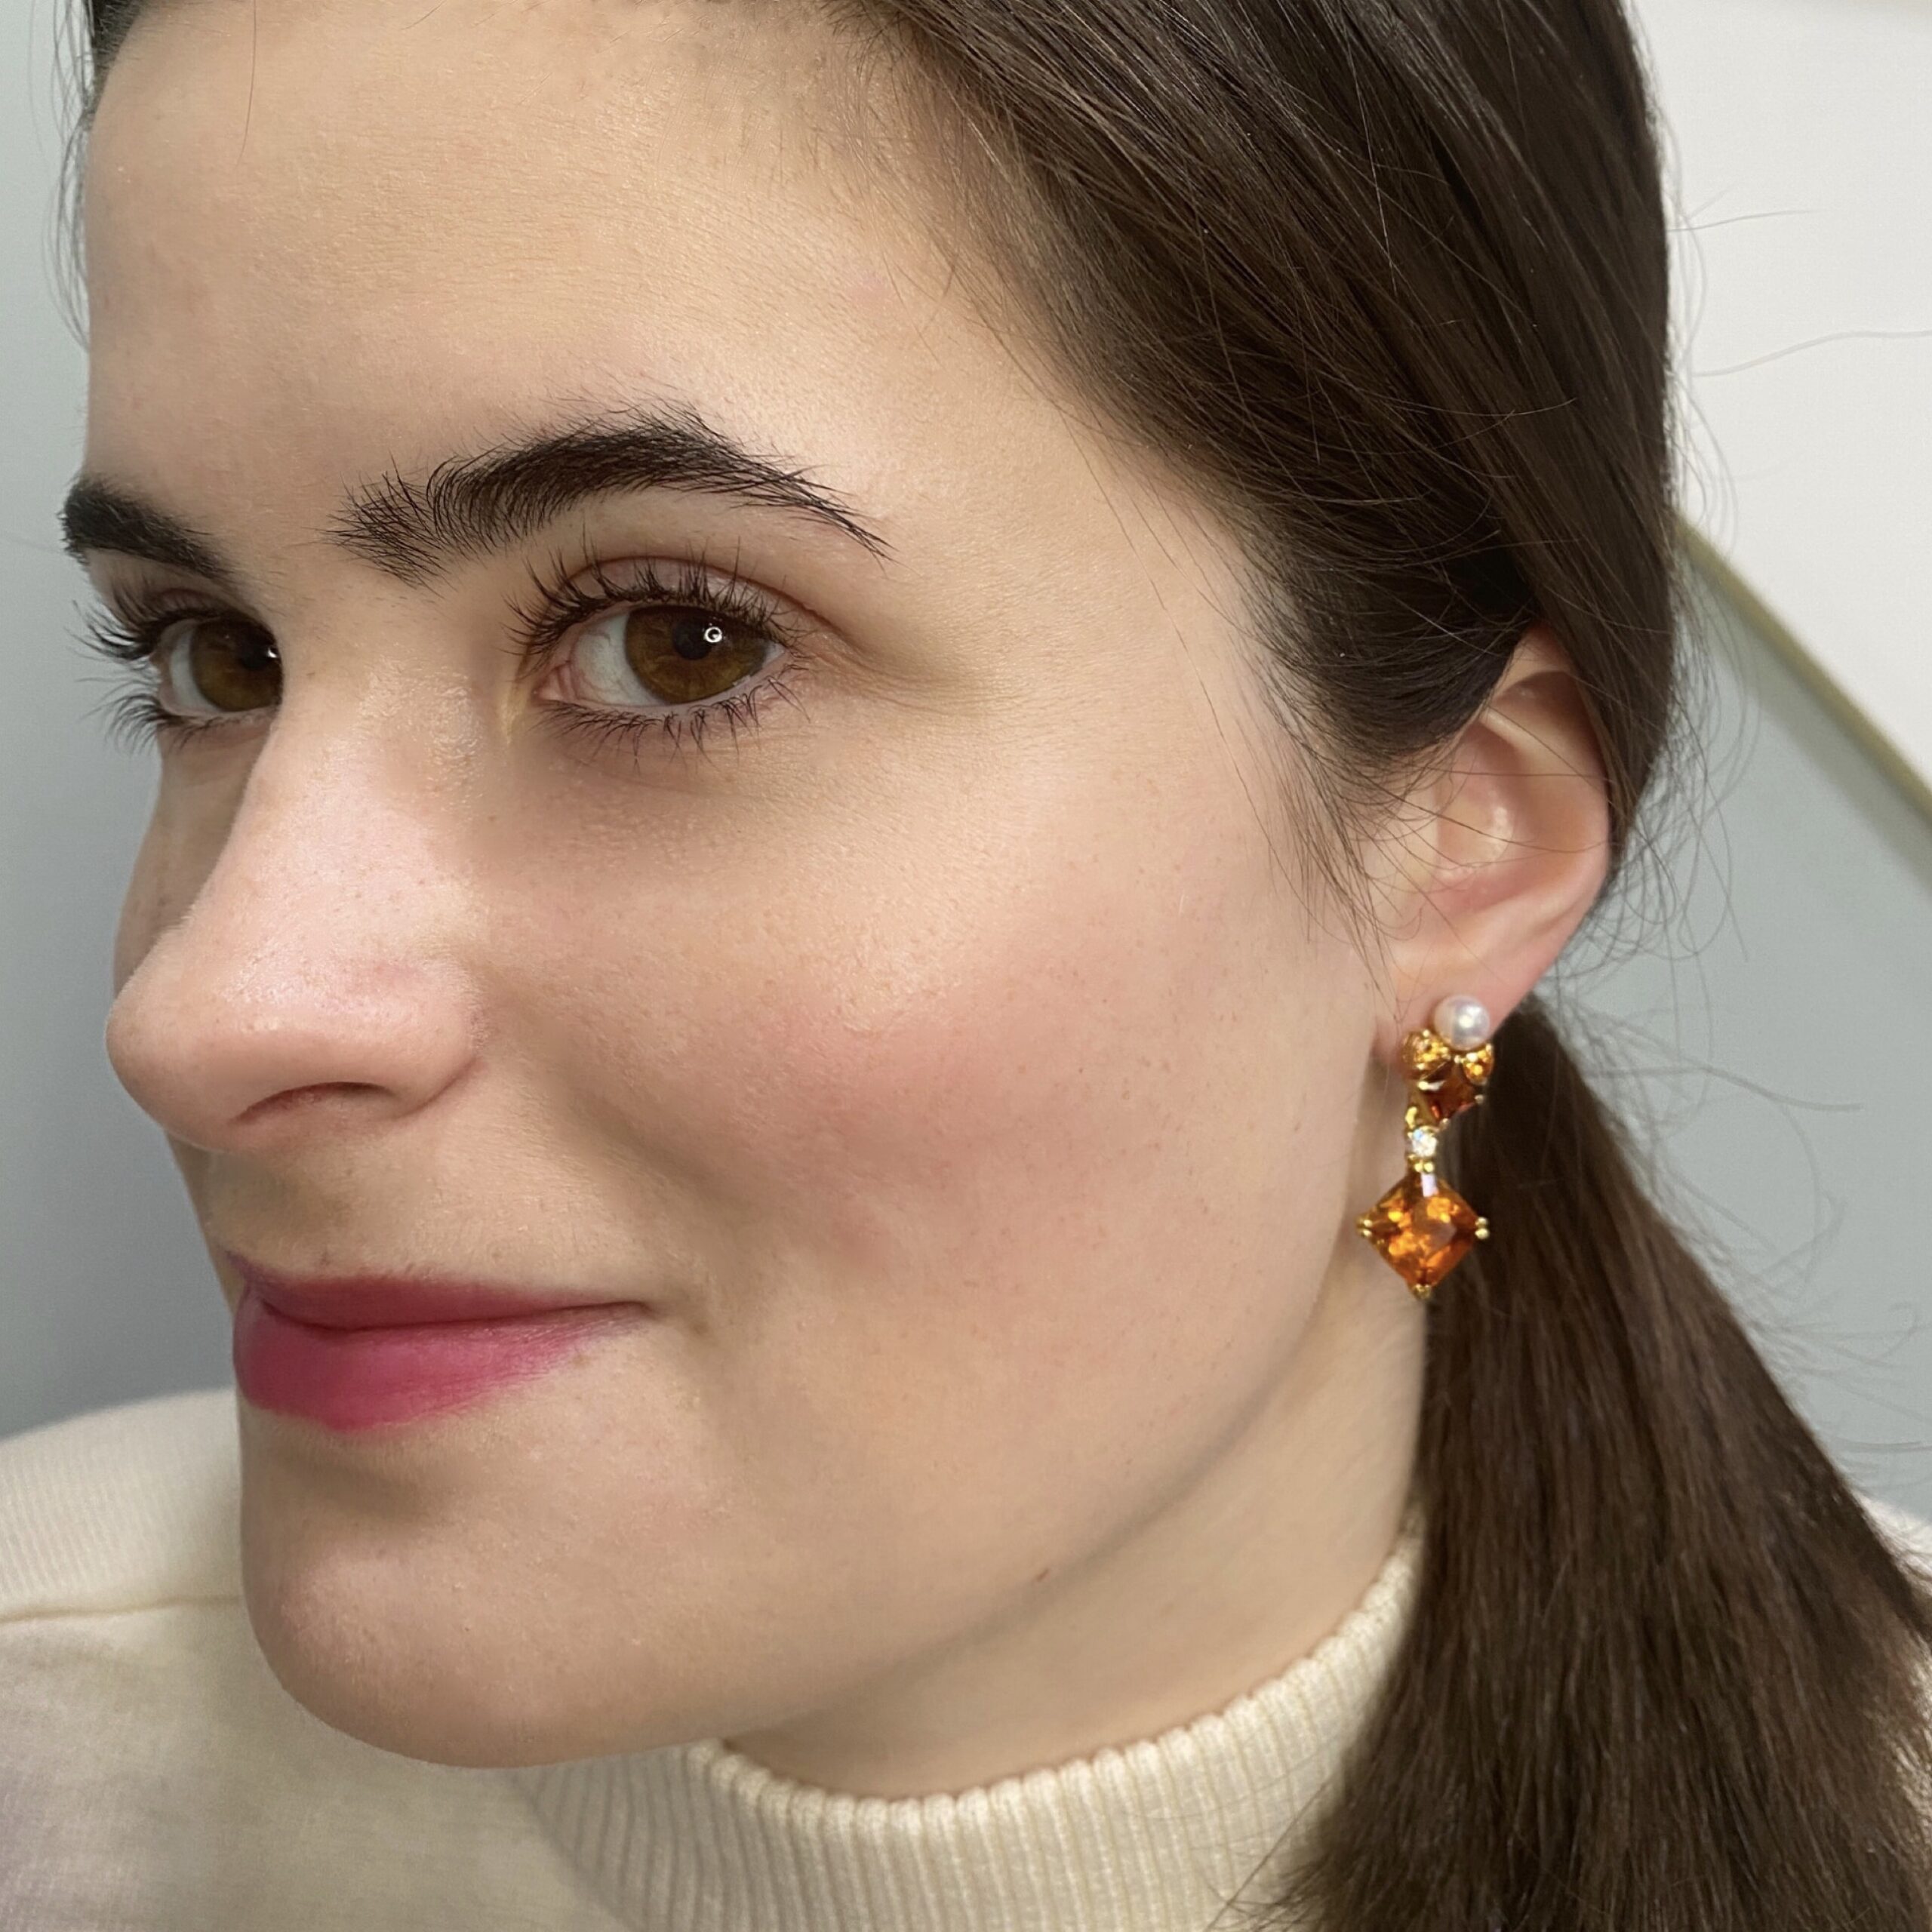 Seraphim Earrings with Citrine, Spessartite Garnet and Pearl with removable Citrine Drop